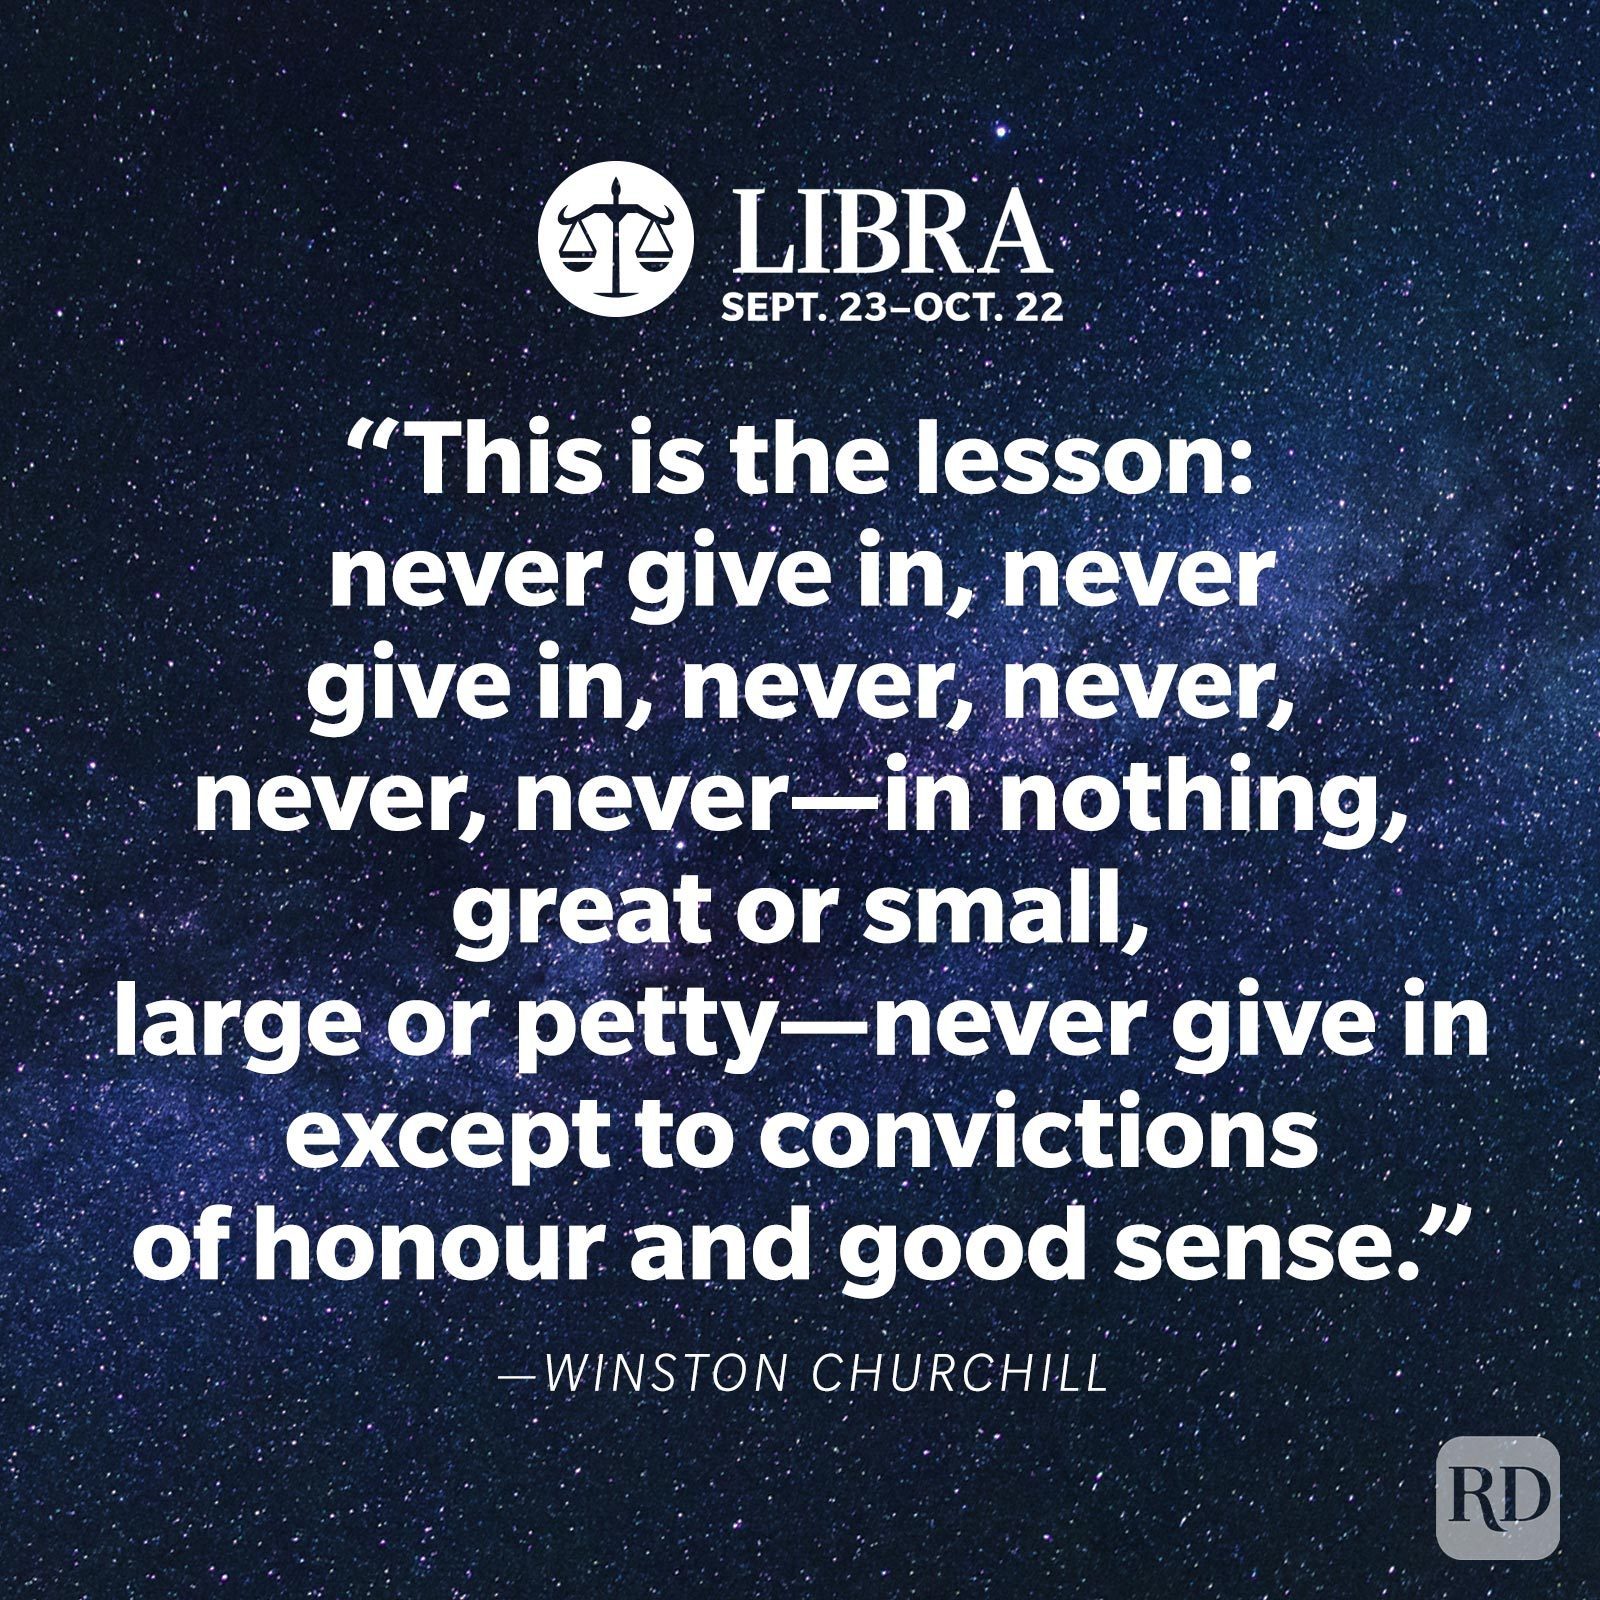 libra The Most InspiratiThe Most Inspirational Zodiac Quotes For Each Sign on Milky Way galaxy backgroundonal Zodiac Quotes For Each Sign Gettyimages 1388219938 Libra 1